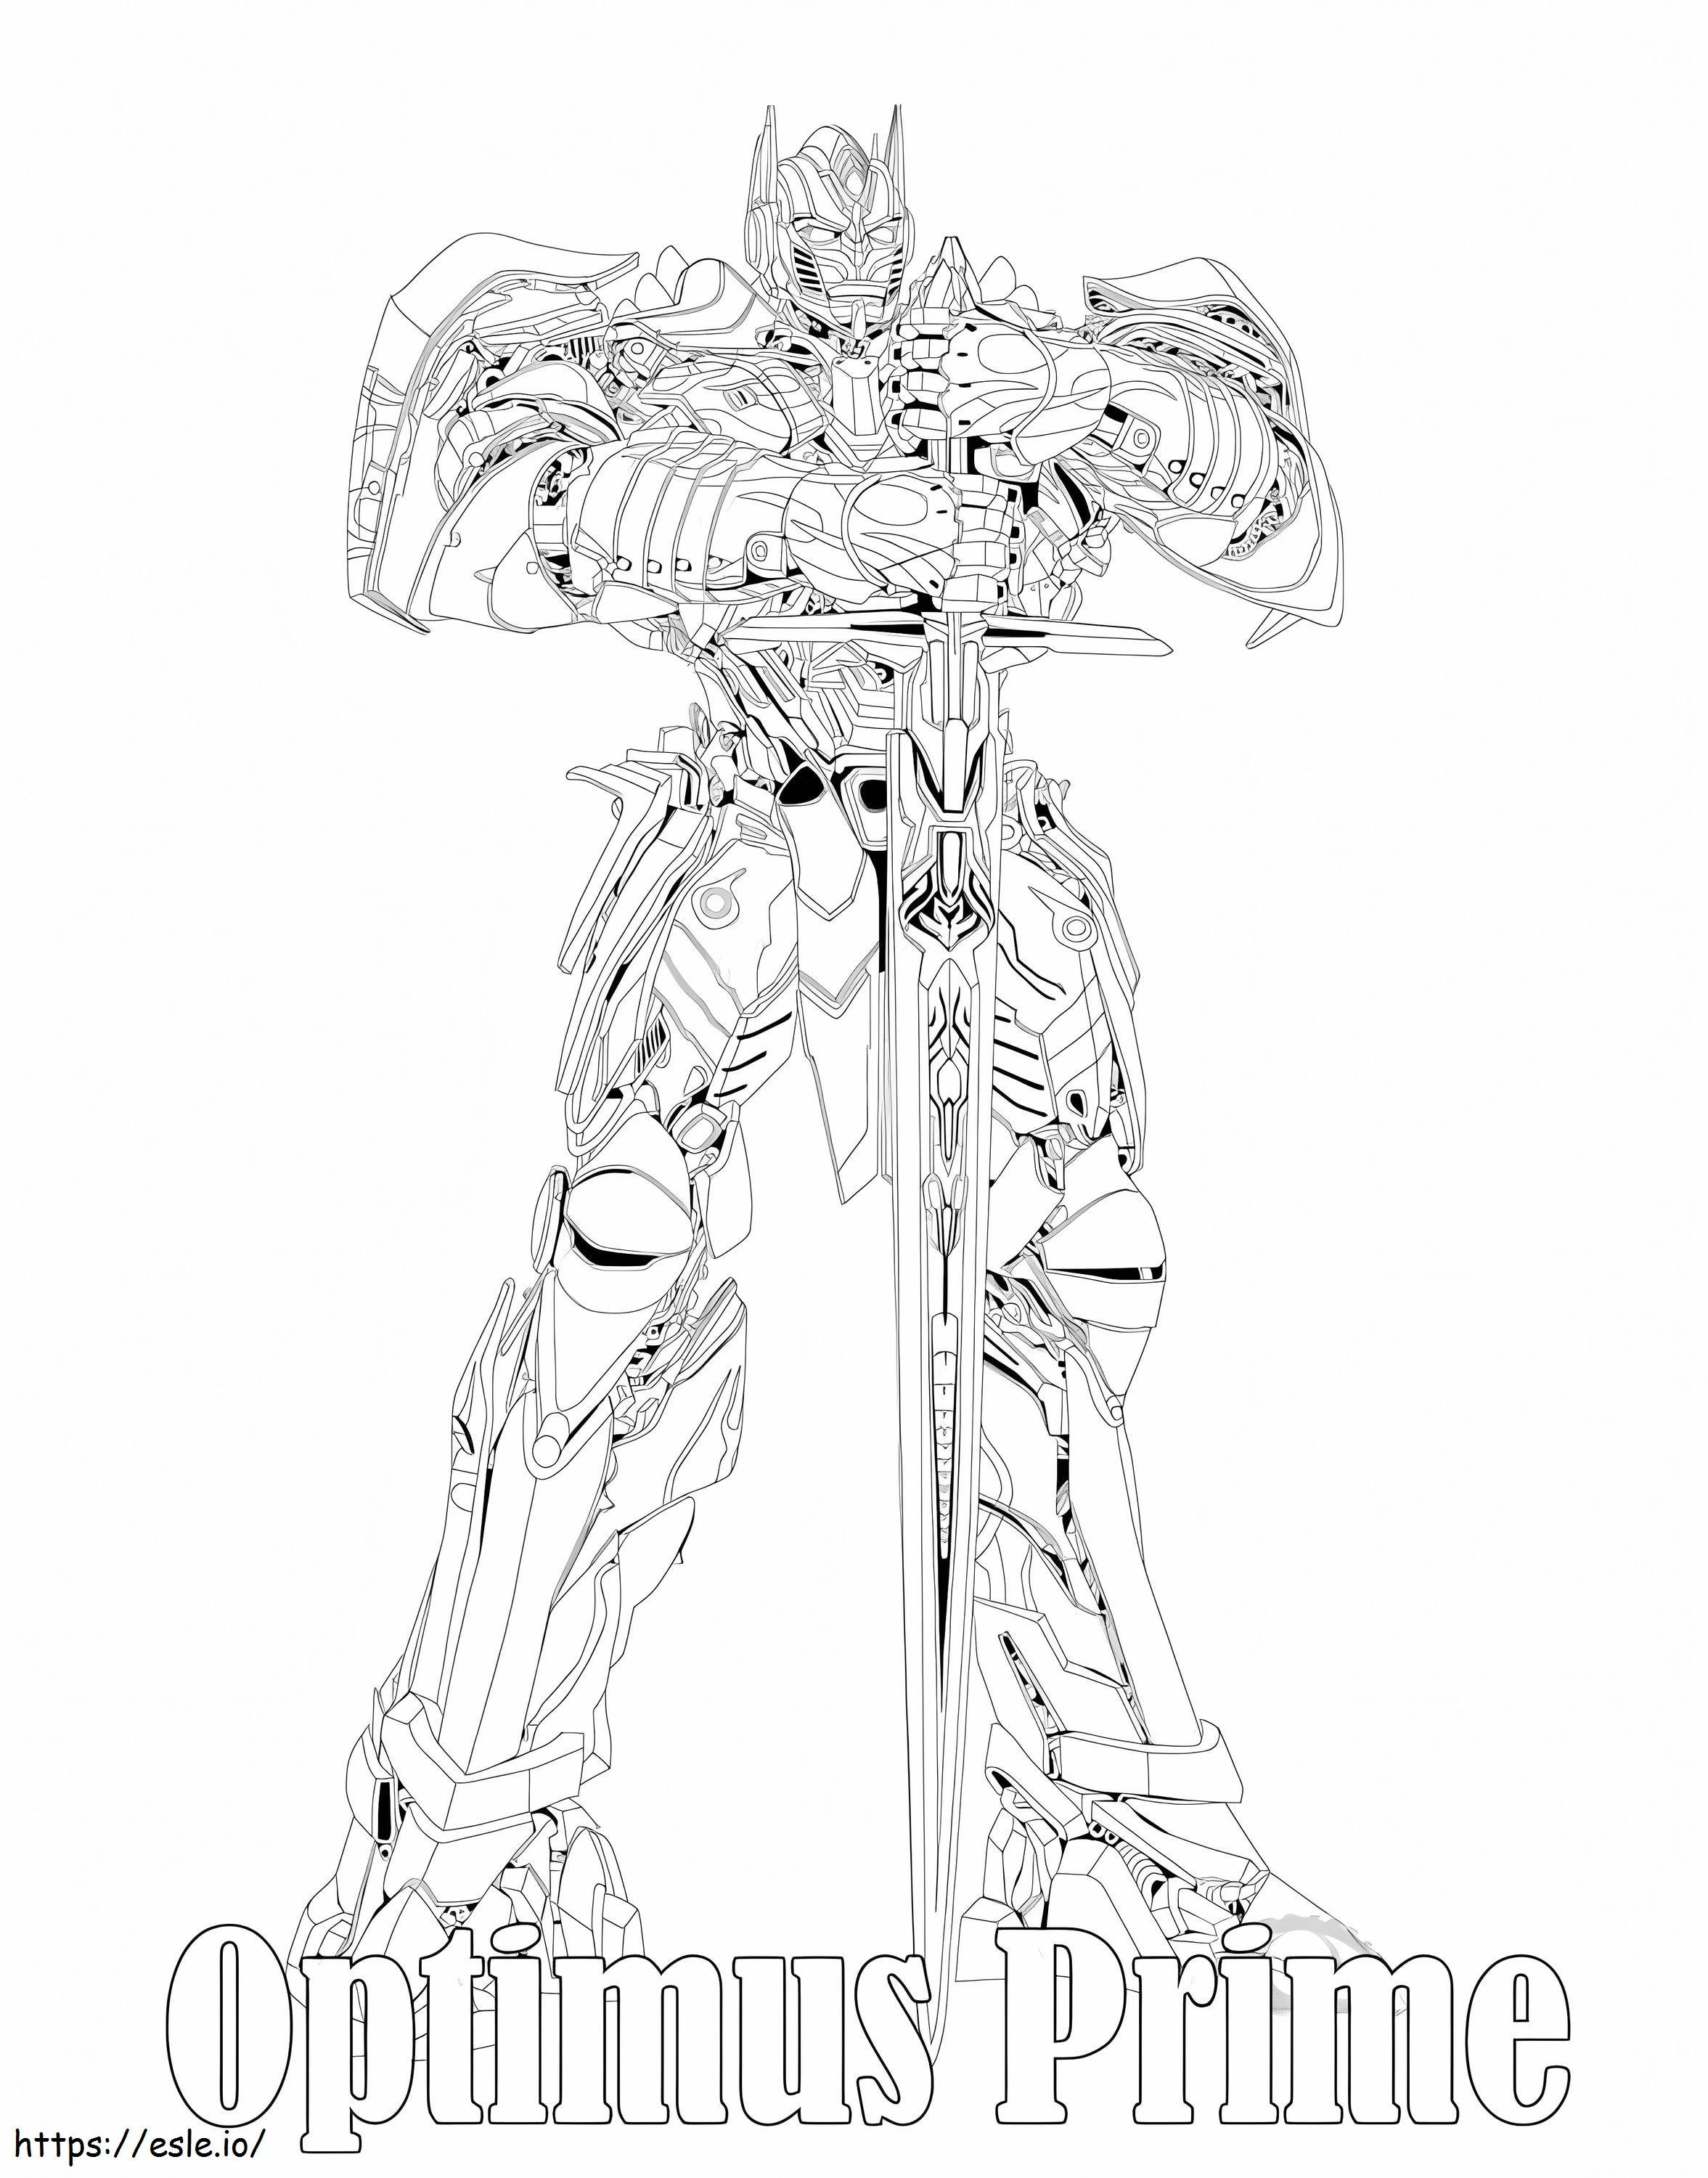 Optimus Prime Holding Sword coloring page